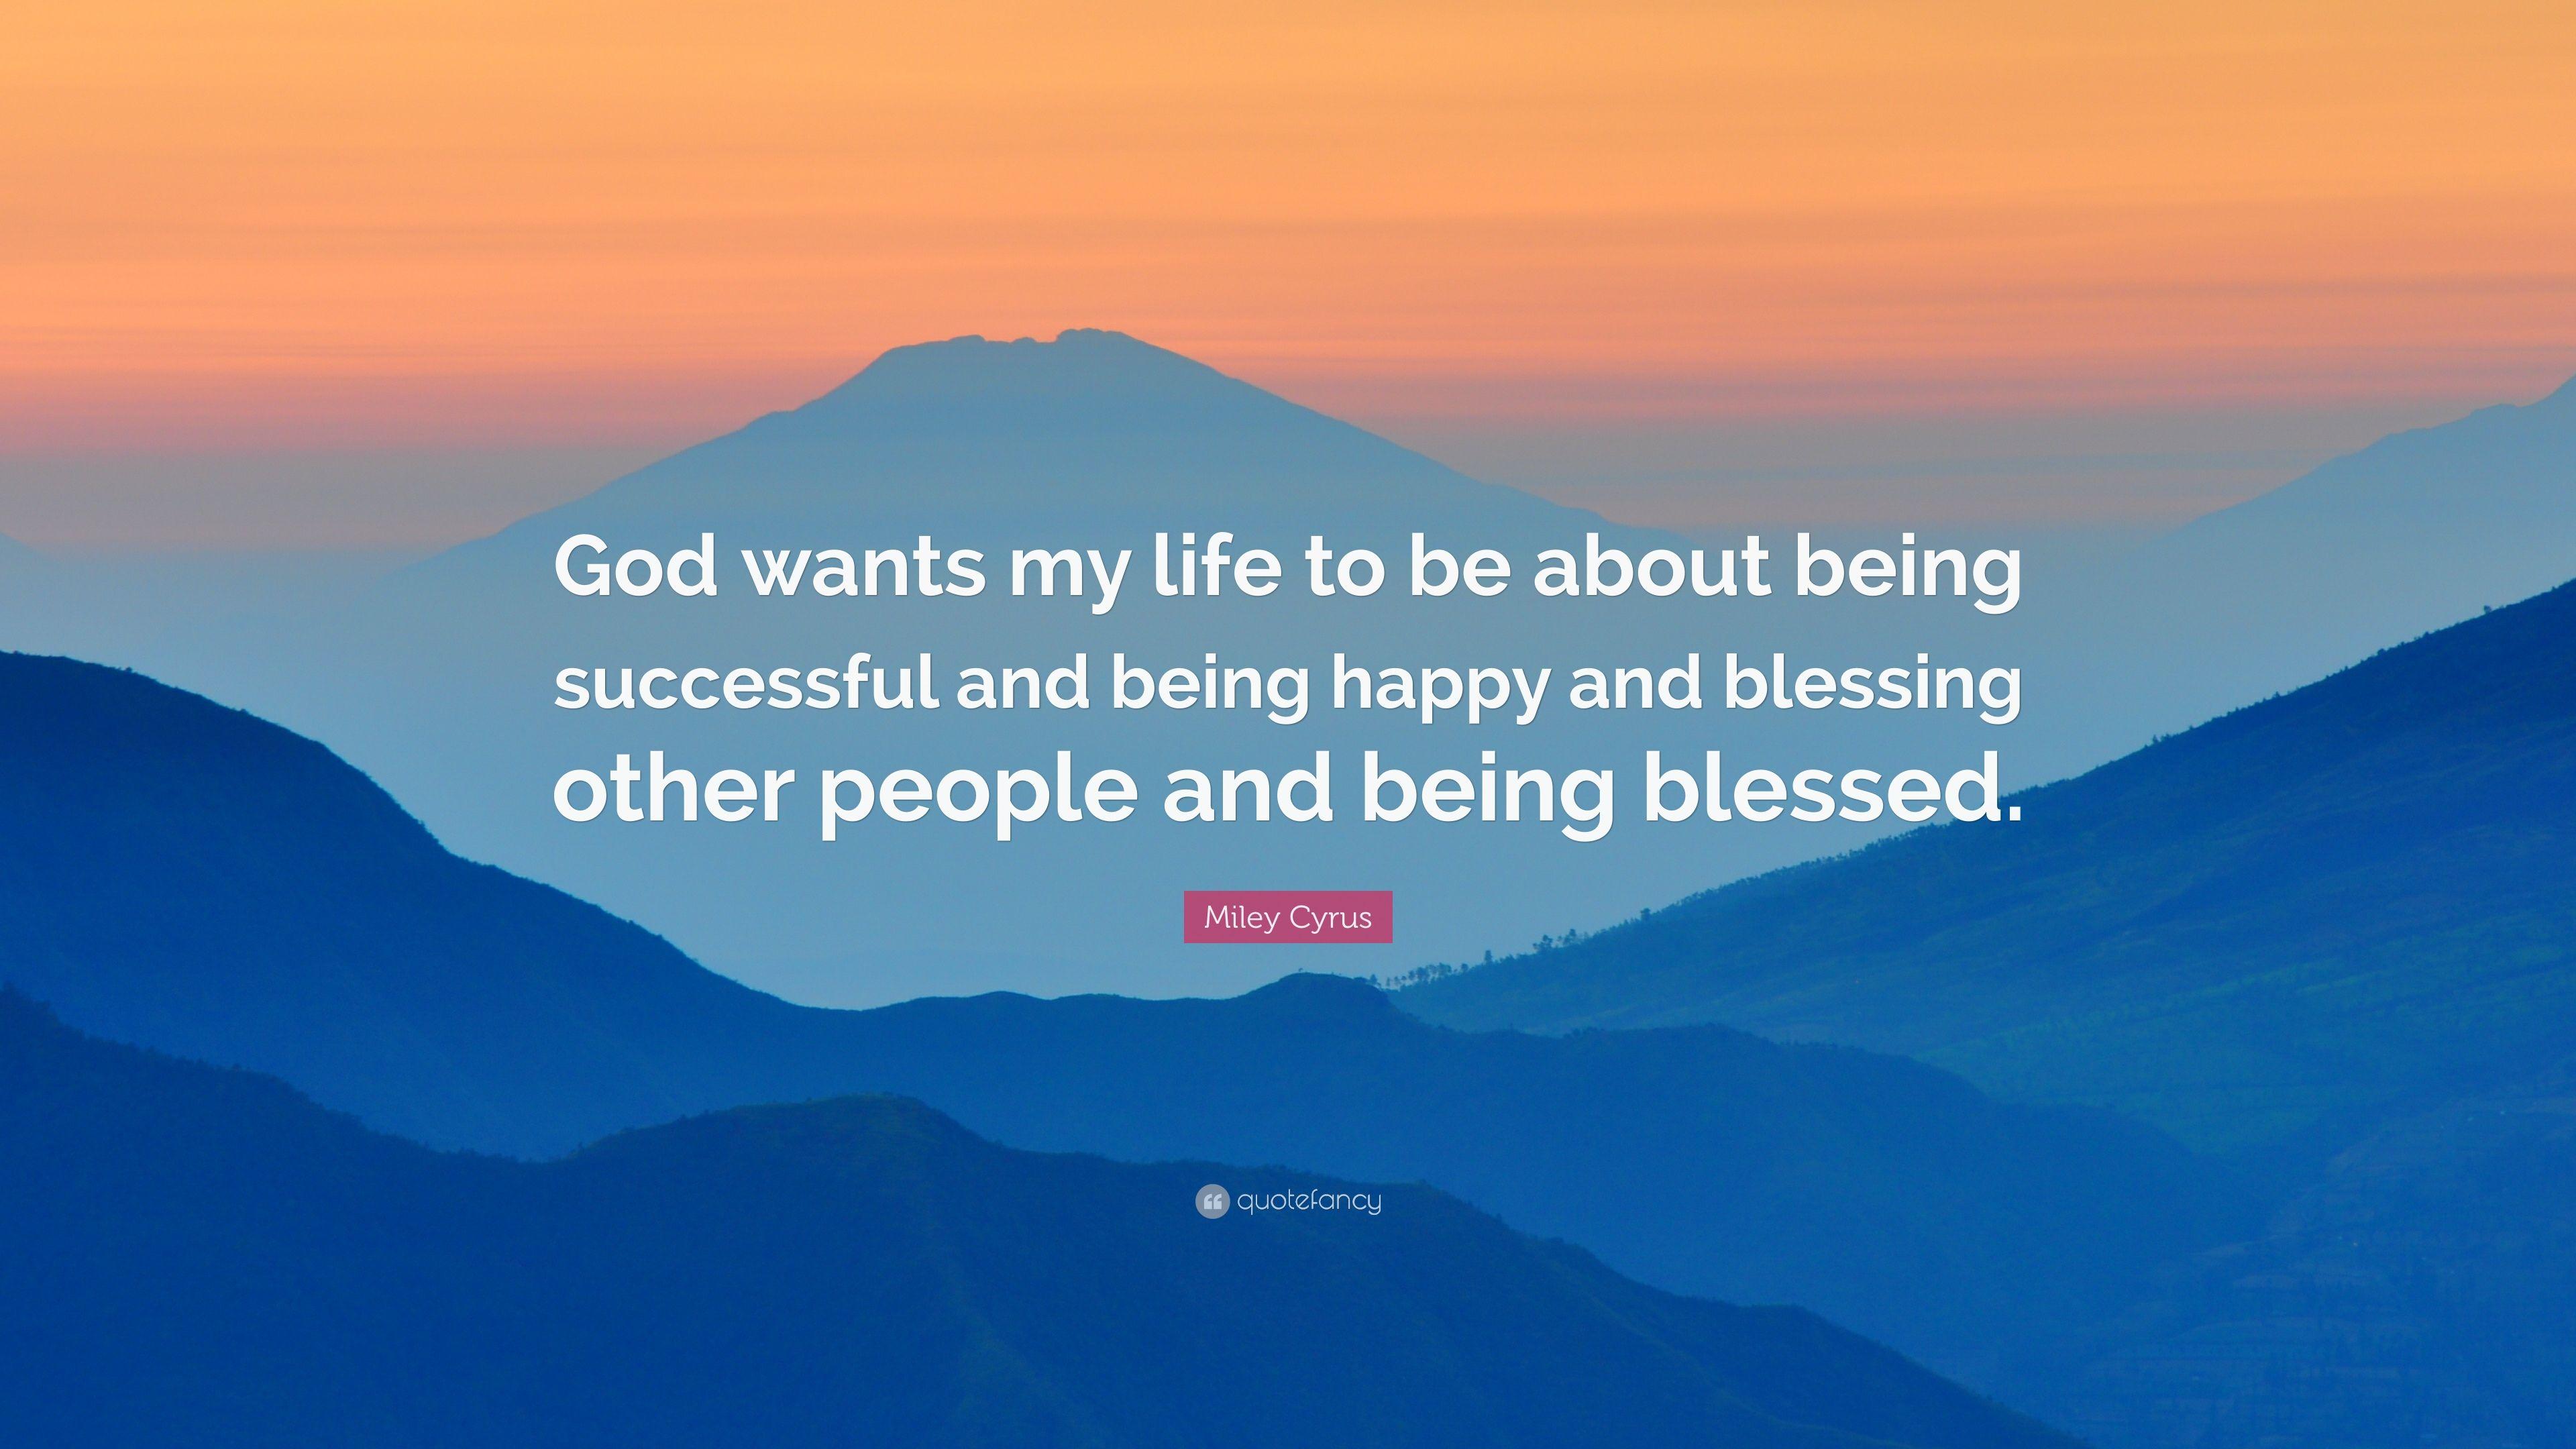 Miley Cyrus Quote: “God wants my life to be about being successful